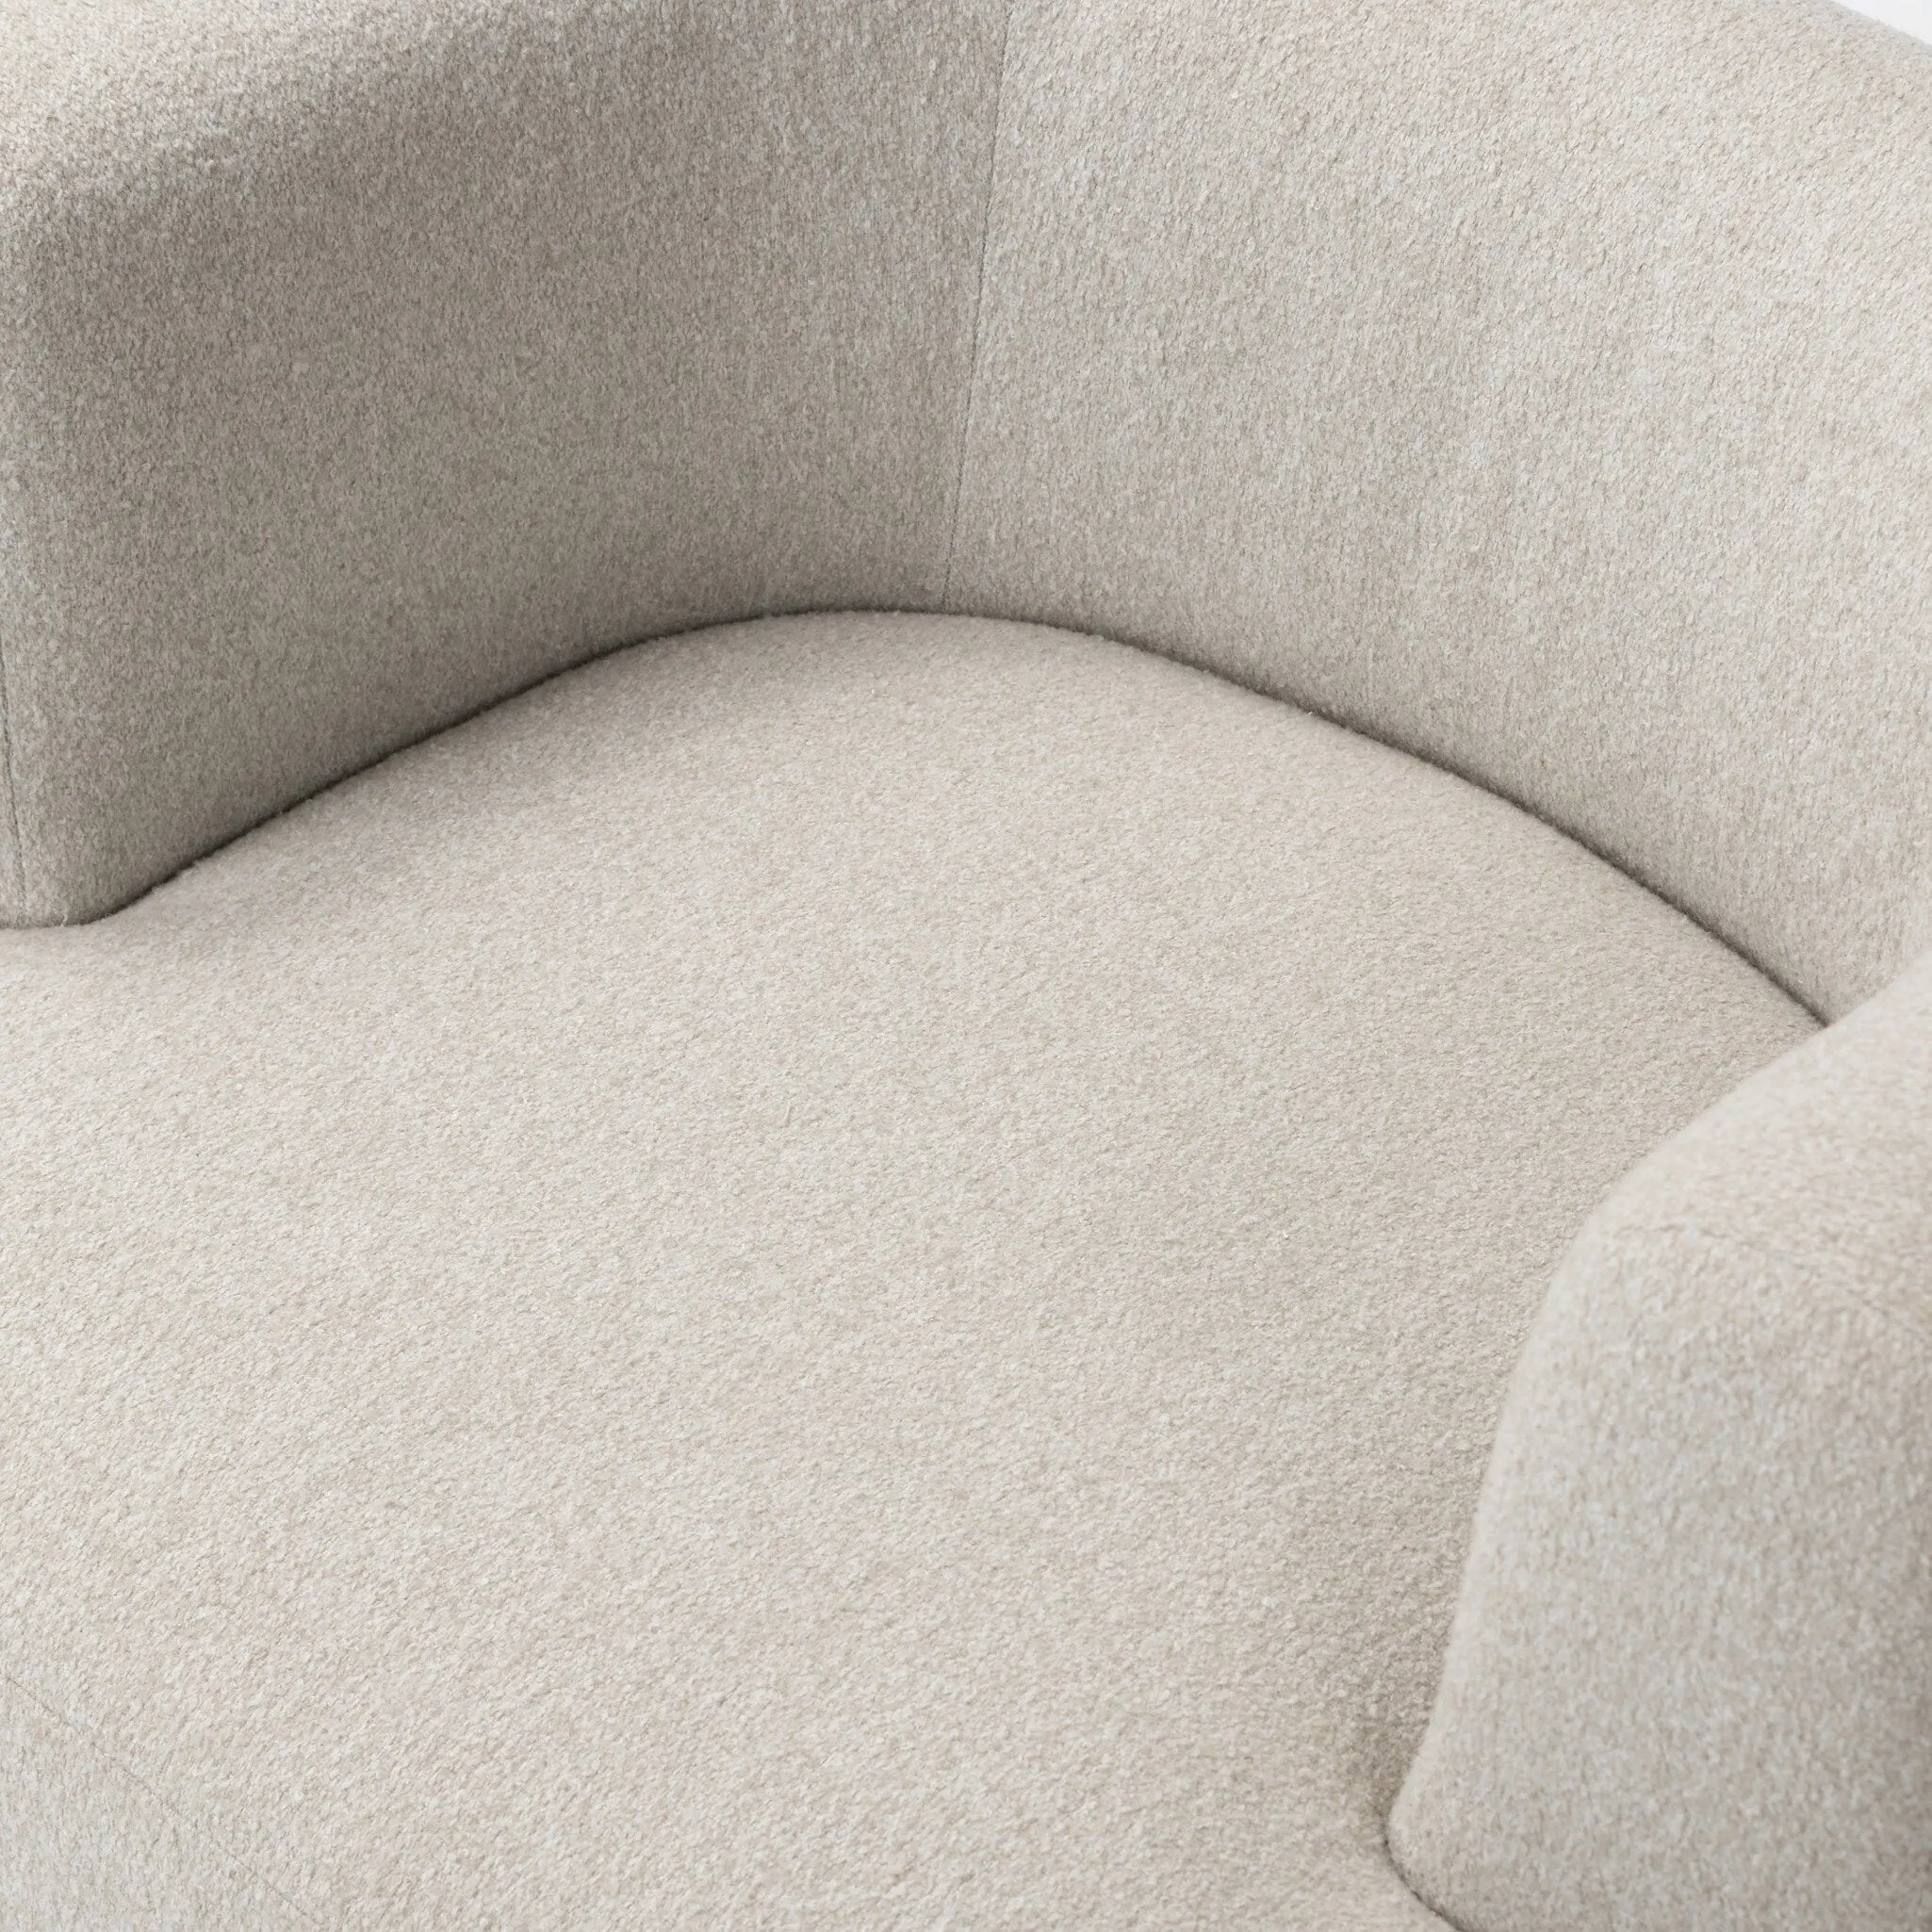 This contemporary wraparound chair melds two forms for a study in seamless balance. The seat's modern form is neutralized with an understated pebble color, while sleek cutouts emphasize the tri-leg base.Collection: Farro Amethyst Home provides interior design, new home construction design consulting, vintage area rugs, and lighting in the Austin metro area.